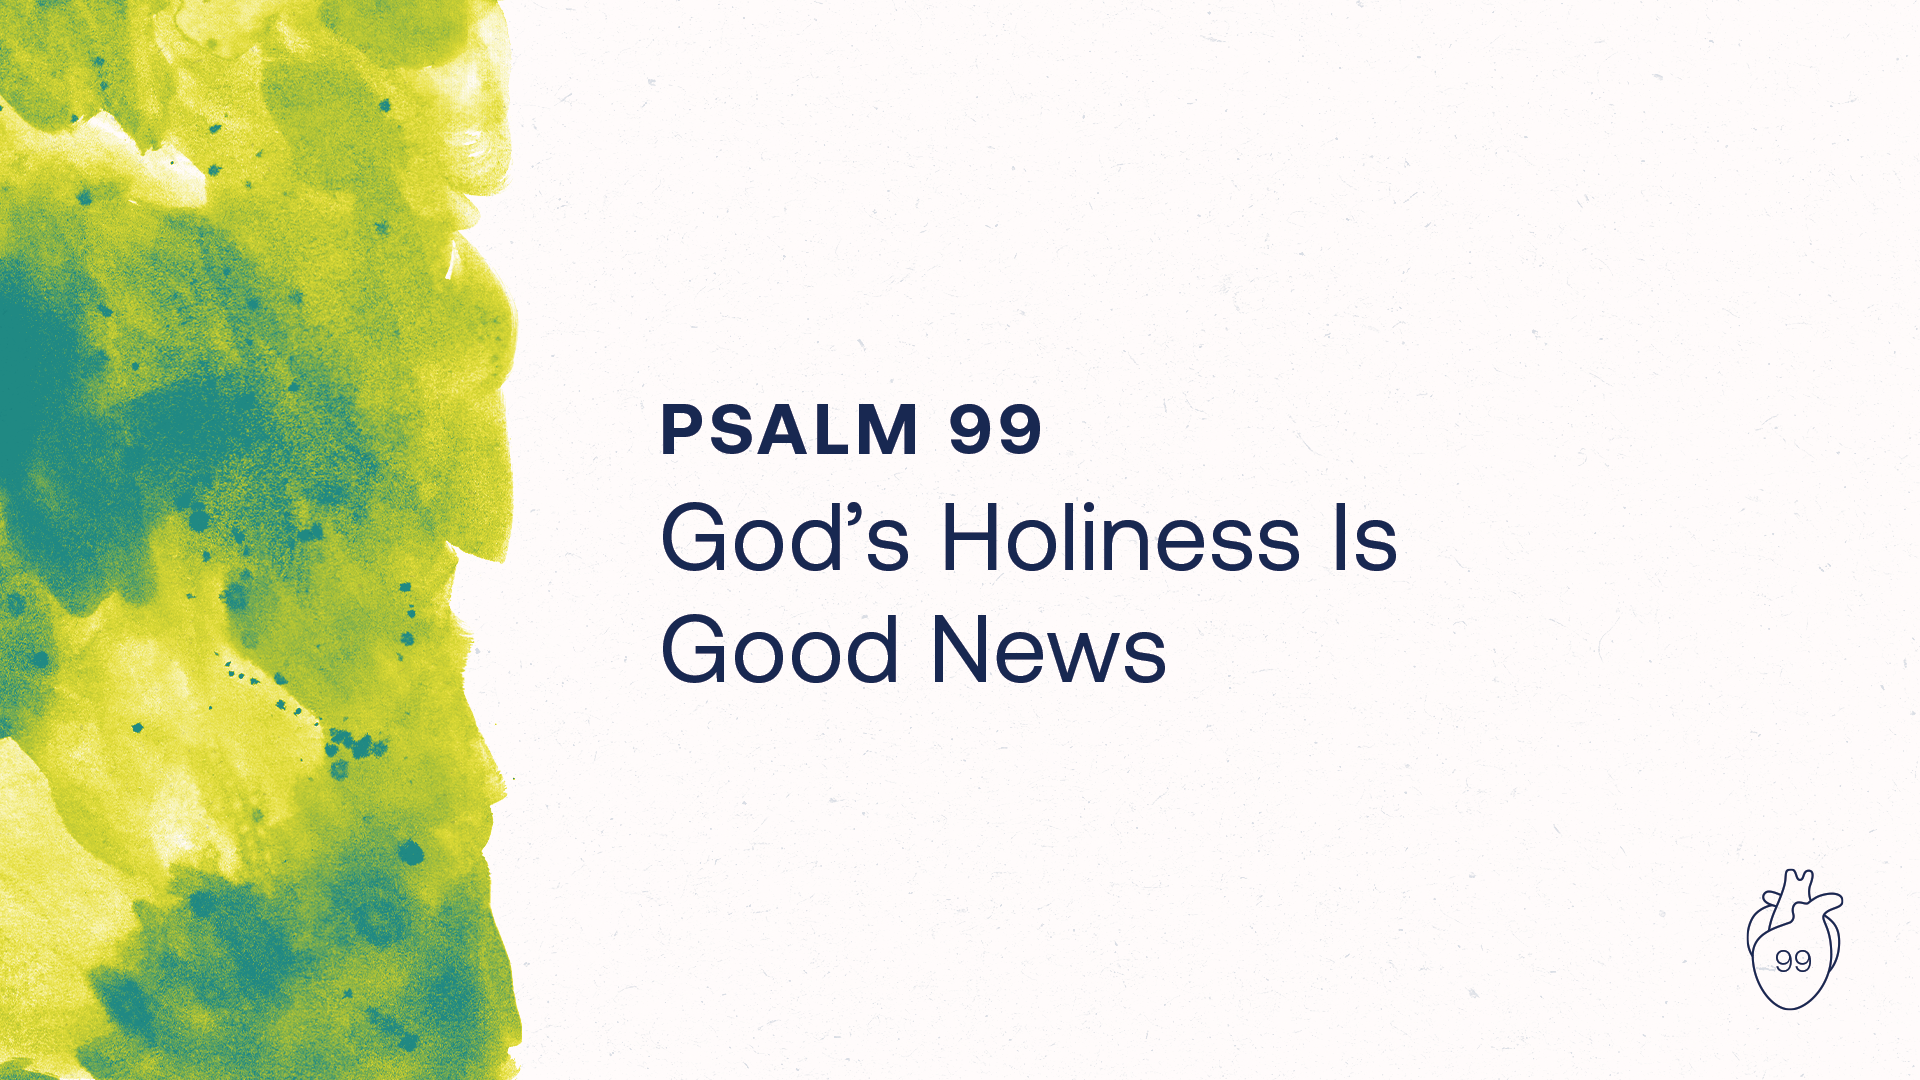 God’s Holiness Is Good News